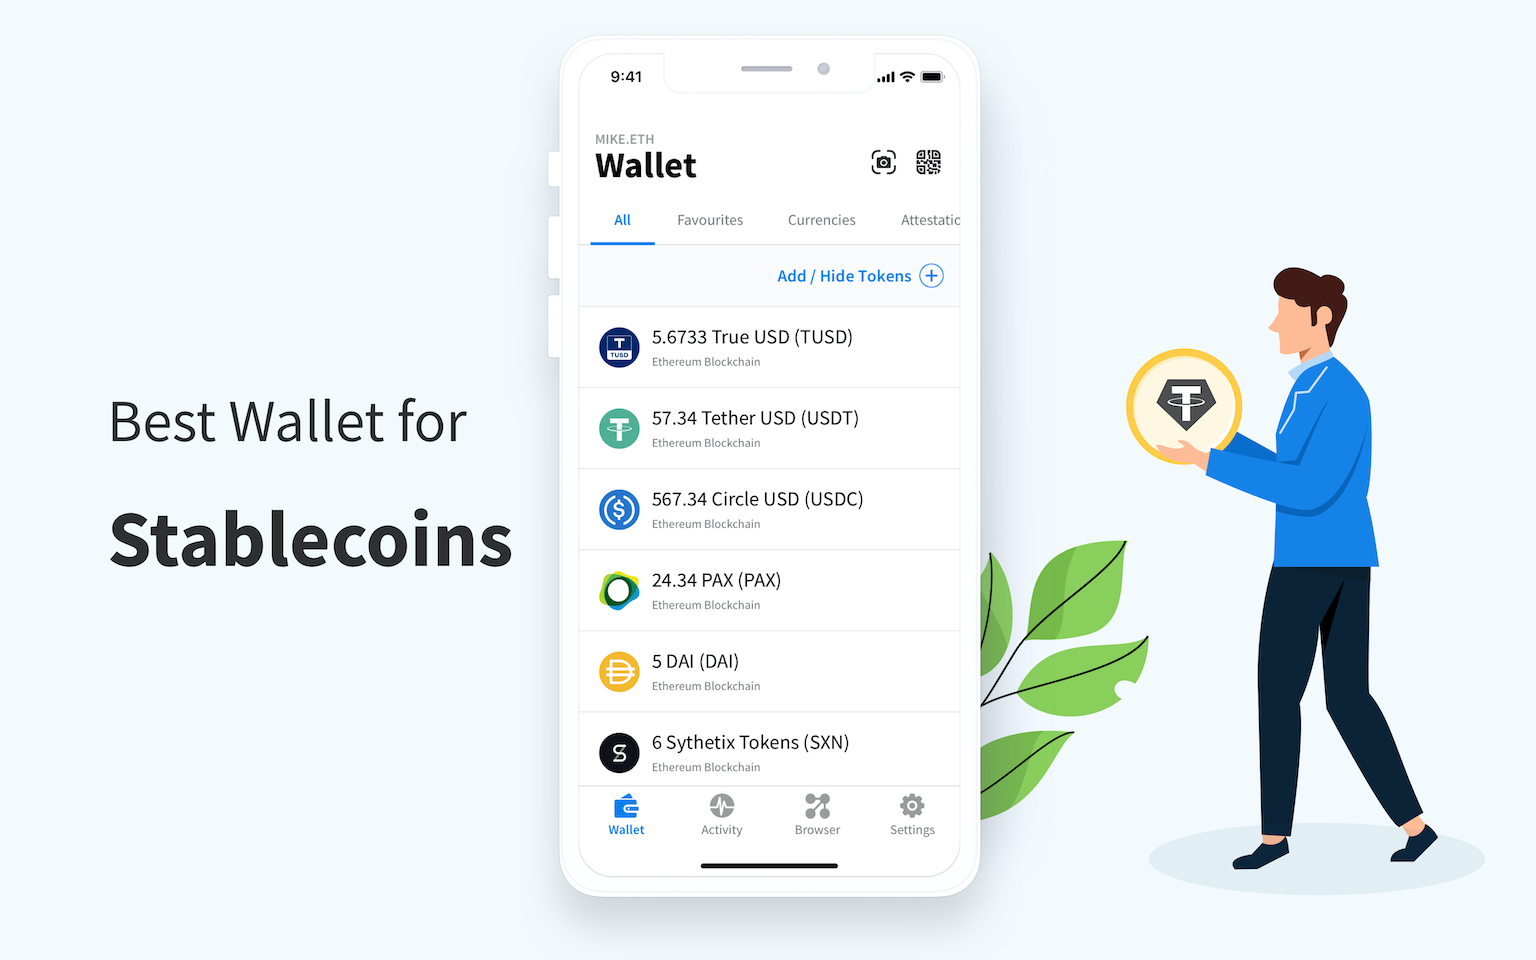 The Best Wallet for Stablecoins